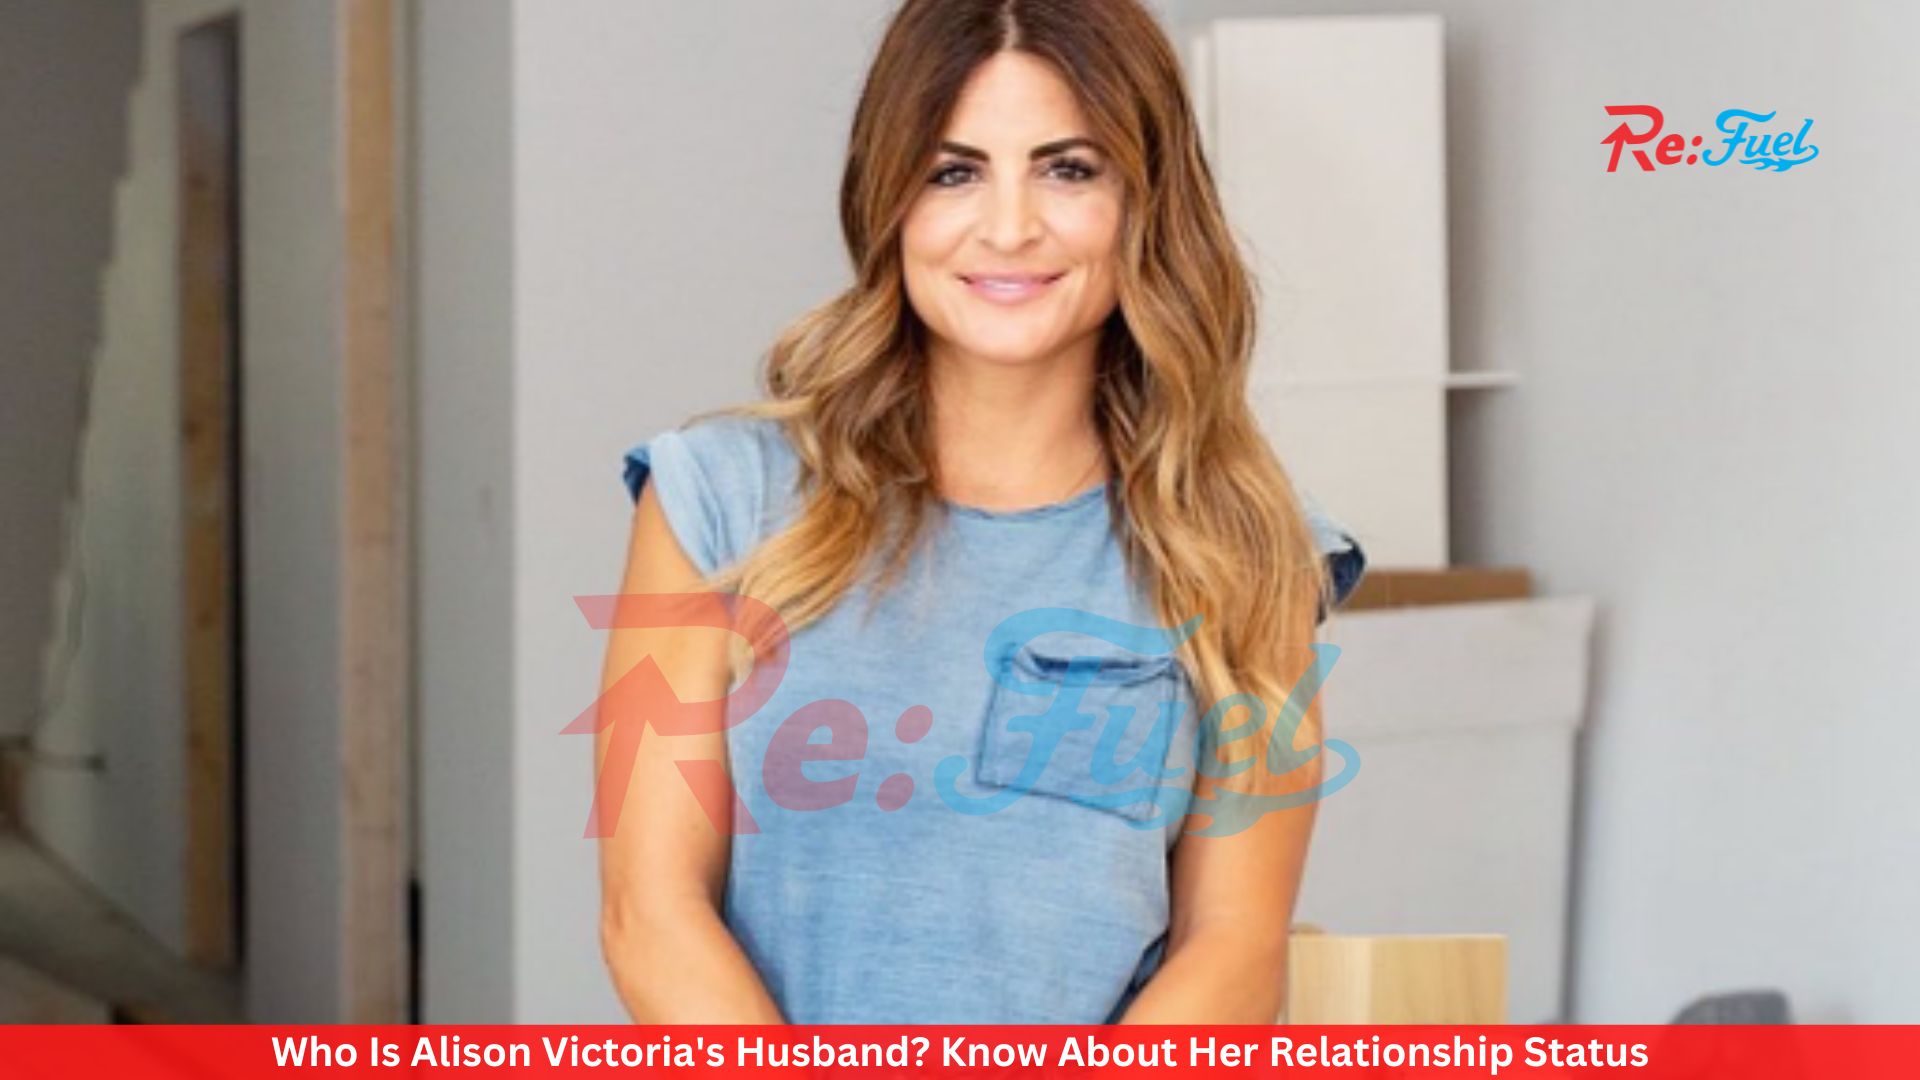 Who Is Alison Victoria's Husband? Know About Her Relationship Status